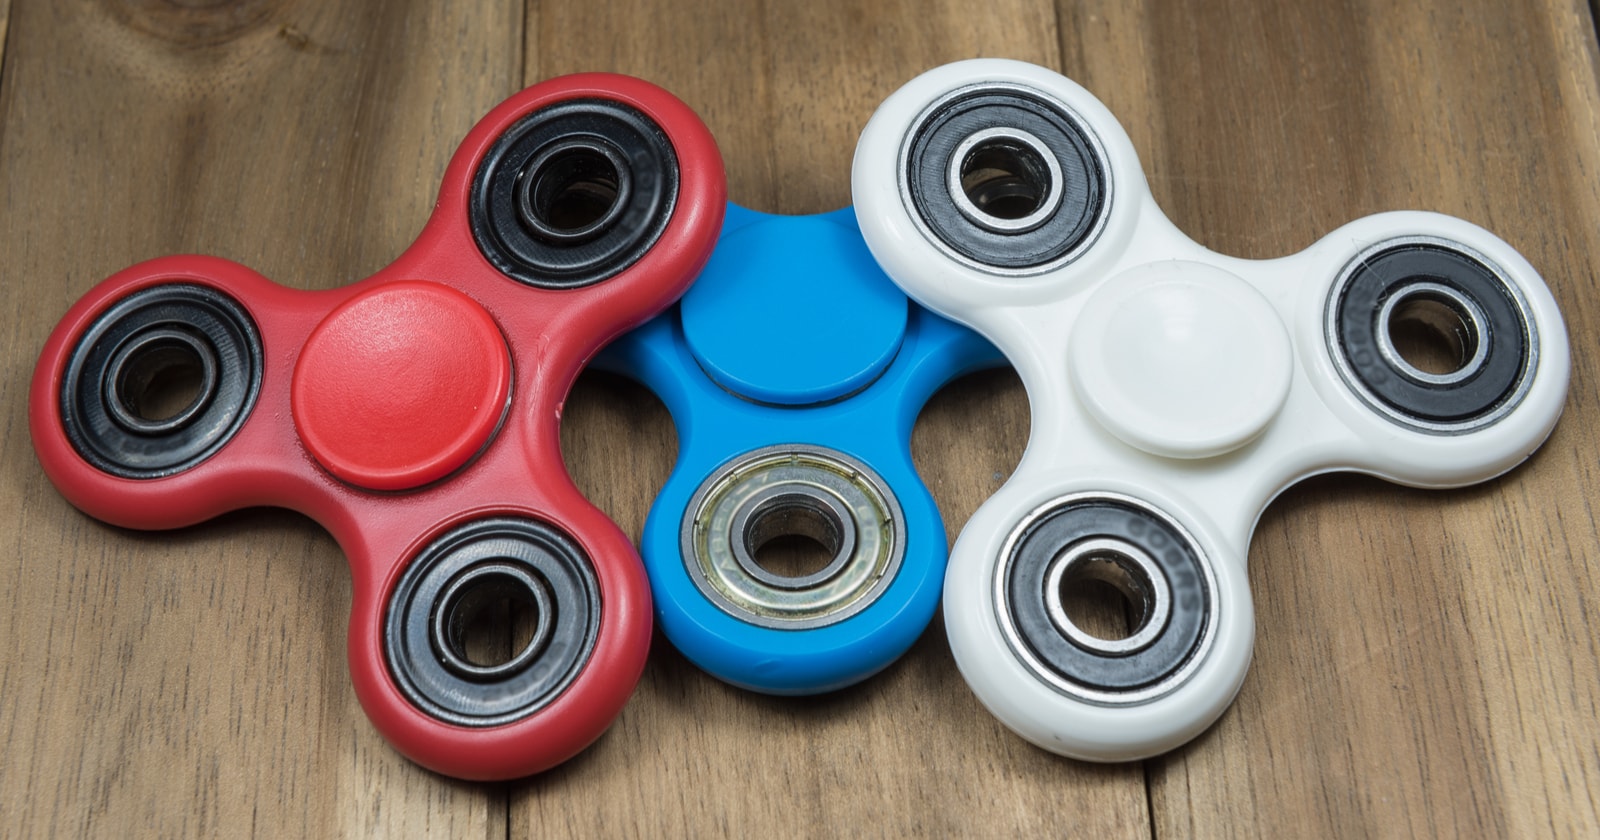 Even Google has a virtual fidget spinner now - The Verge